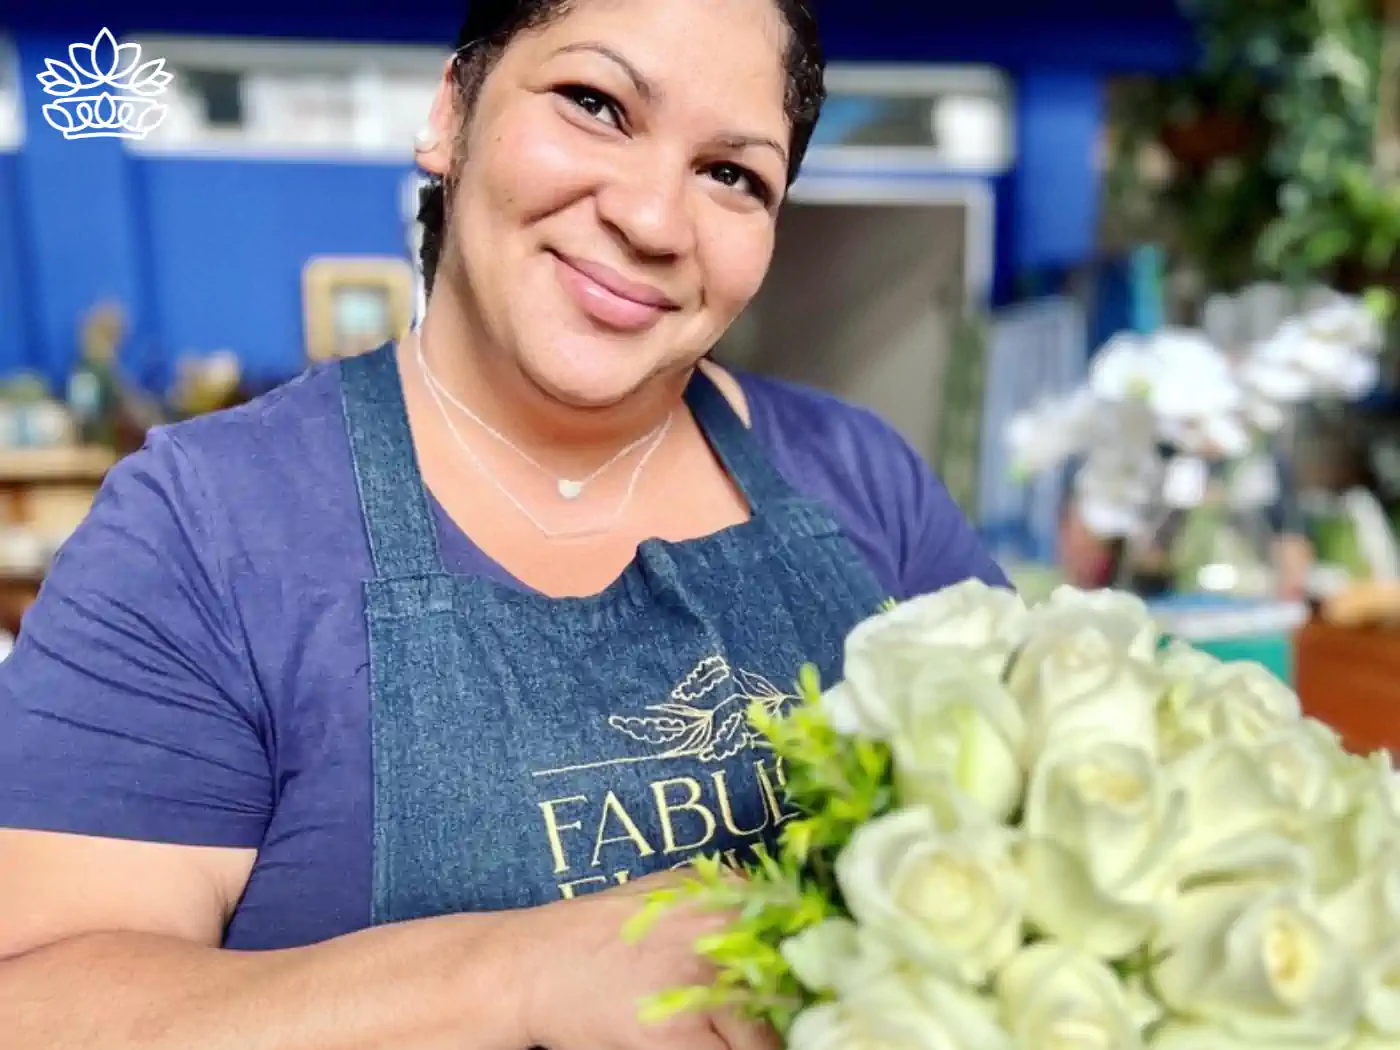 A cheerful florist in a blue apron proudly presenting a bouquet of white roses, embodying expert craftsmanship in floral design. Fabulous Flowers and Gifts: Flower Arrangements Under R500, Delivered with Heart.